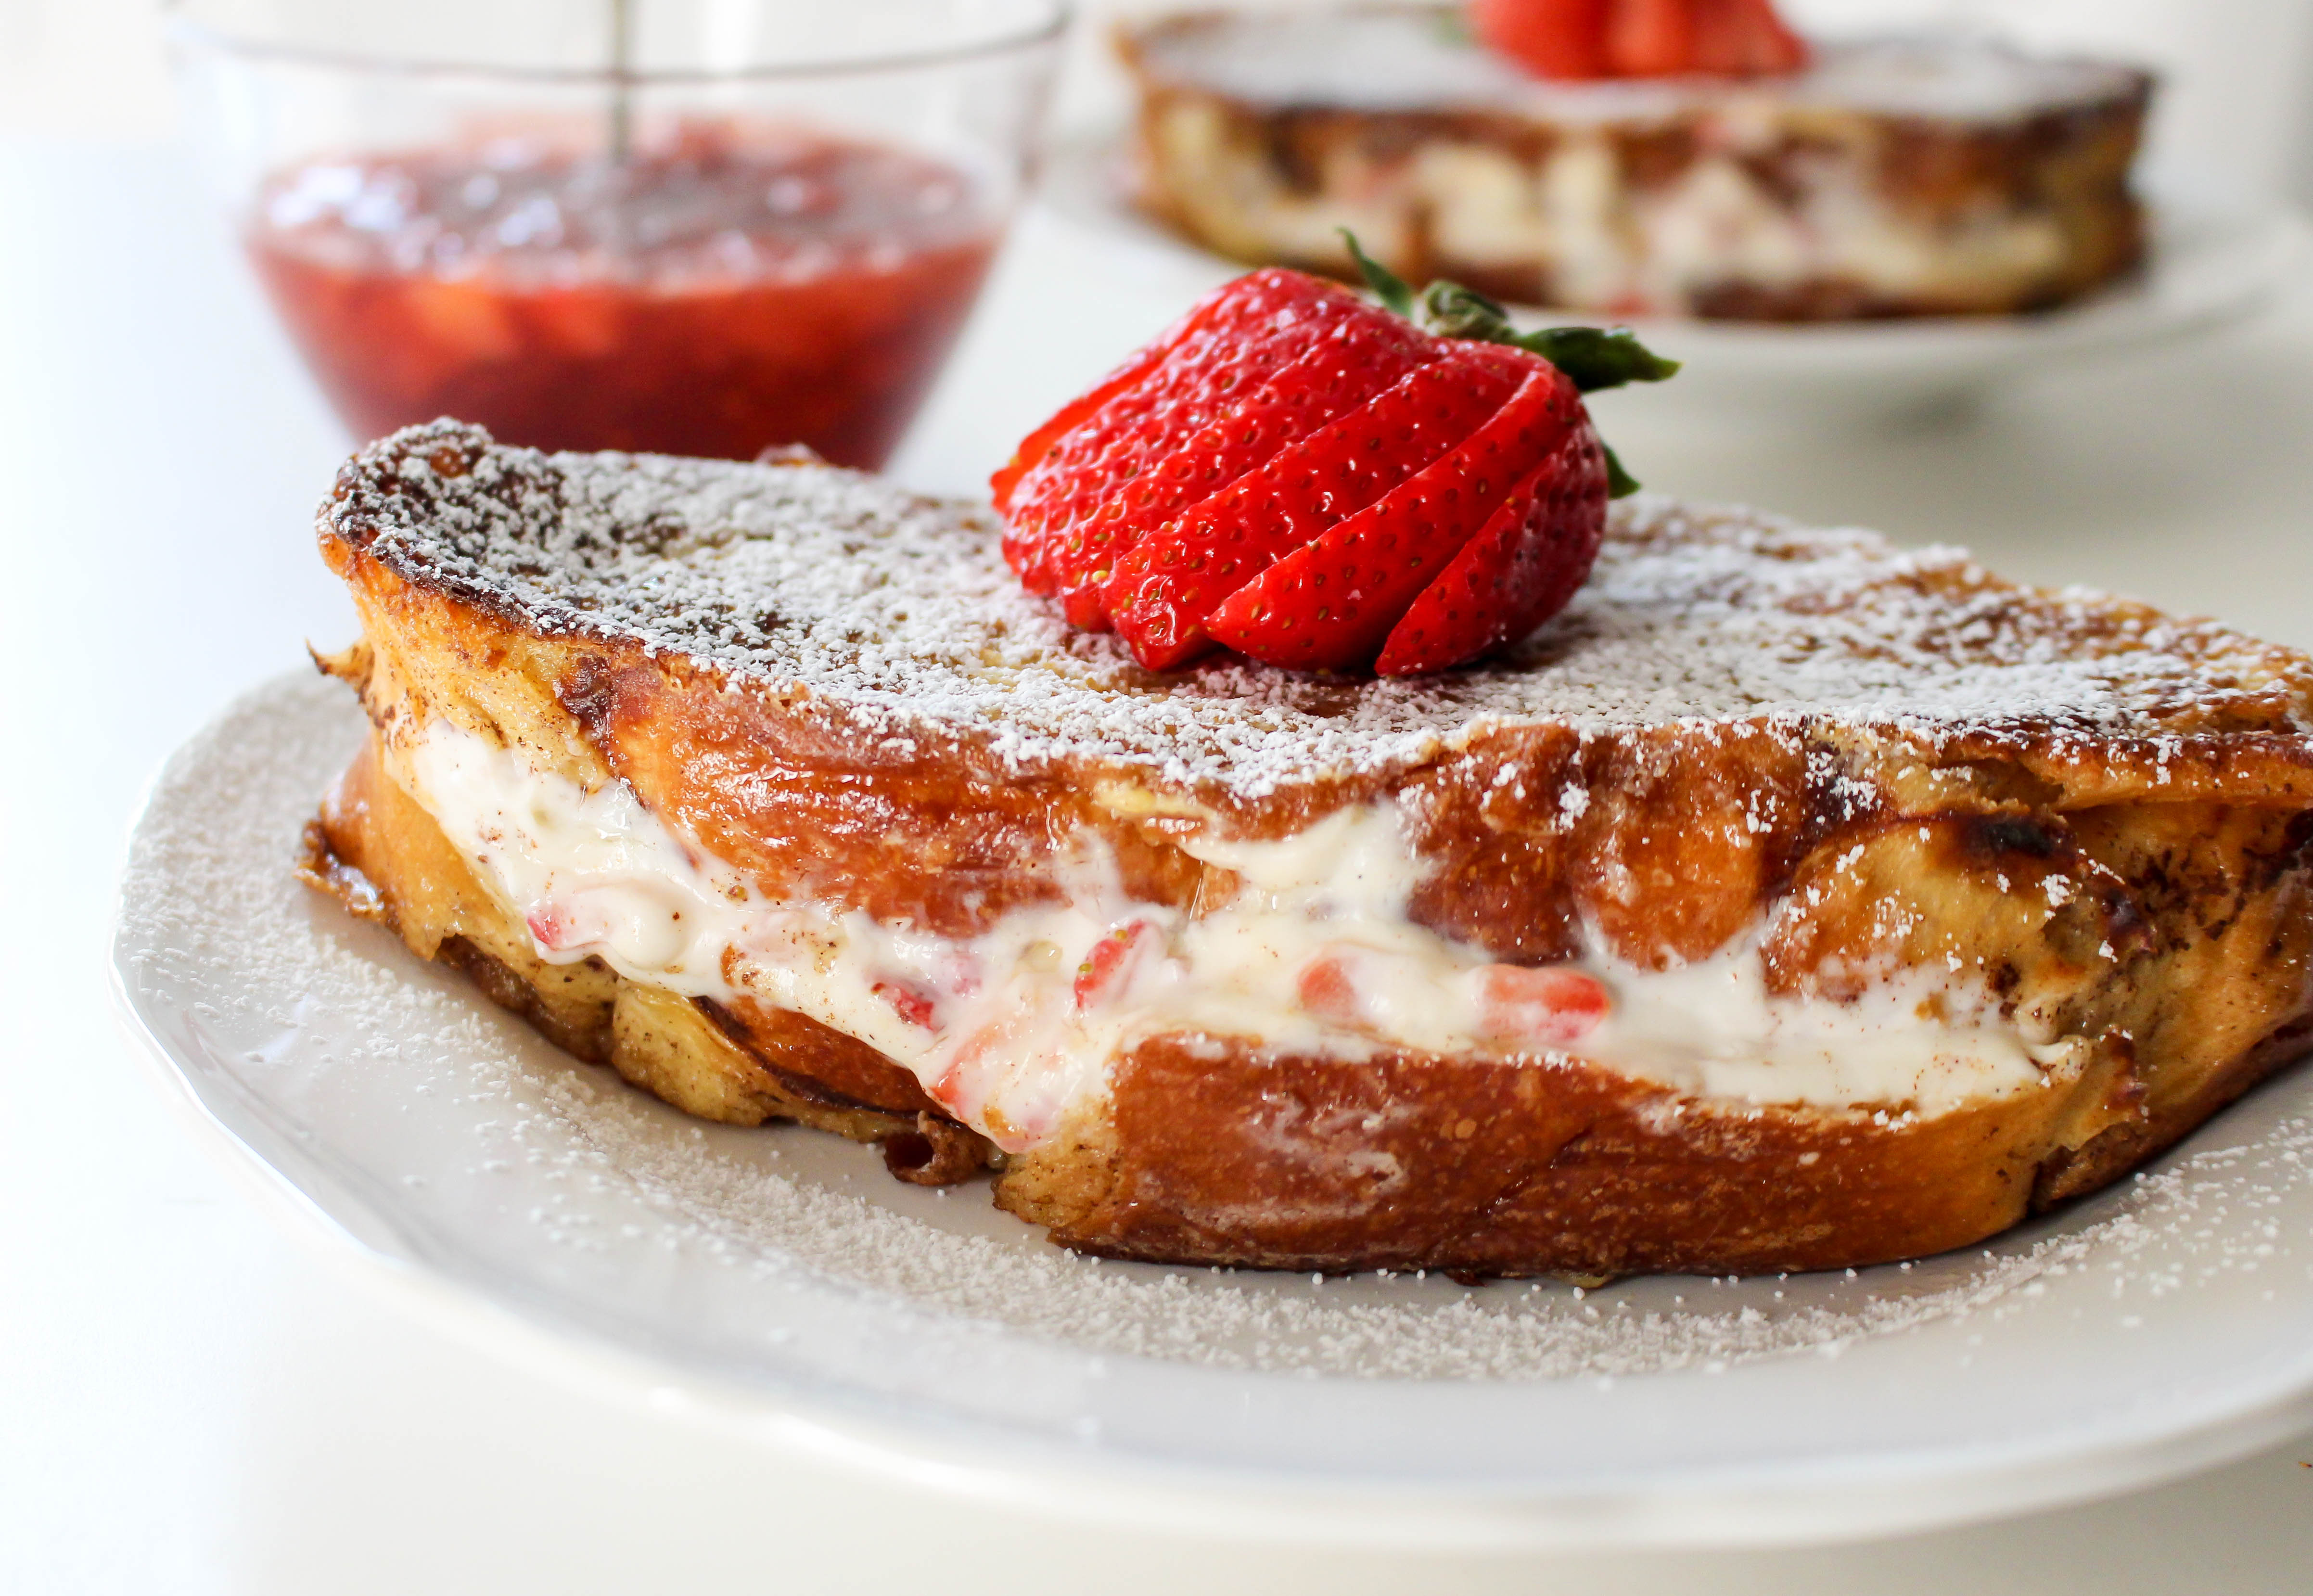 Strawberries & Cream Stuffed French Toast with Strawberry Maple Syrup